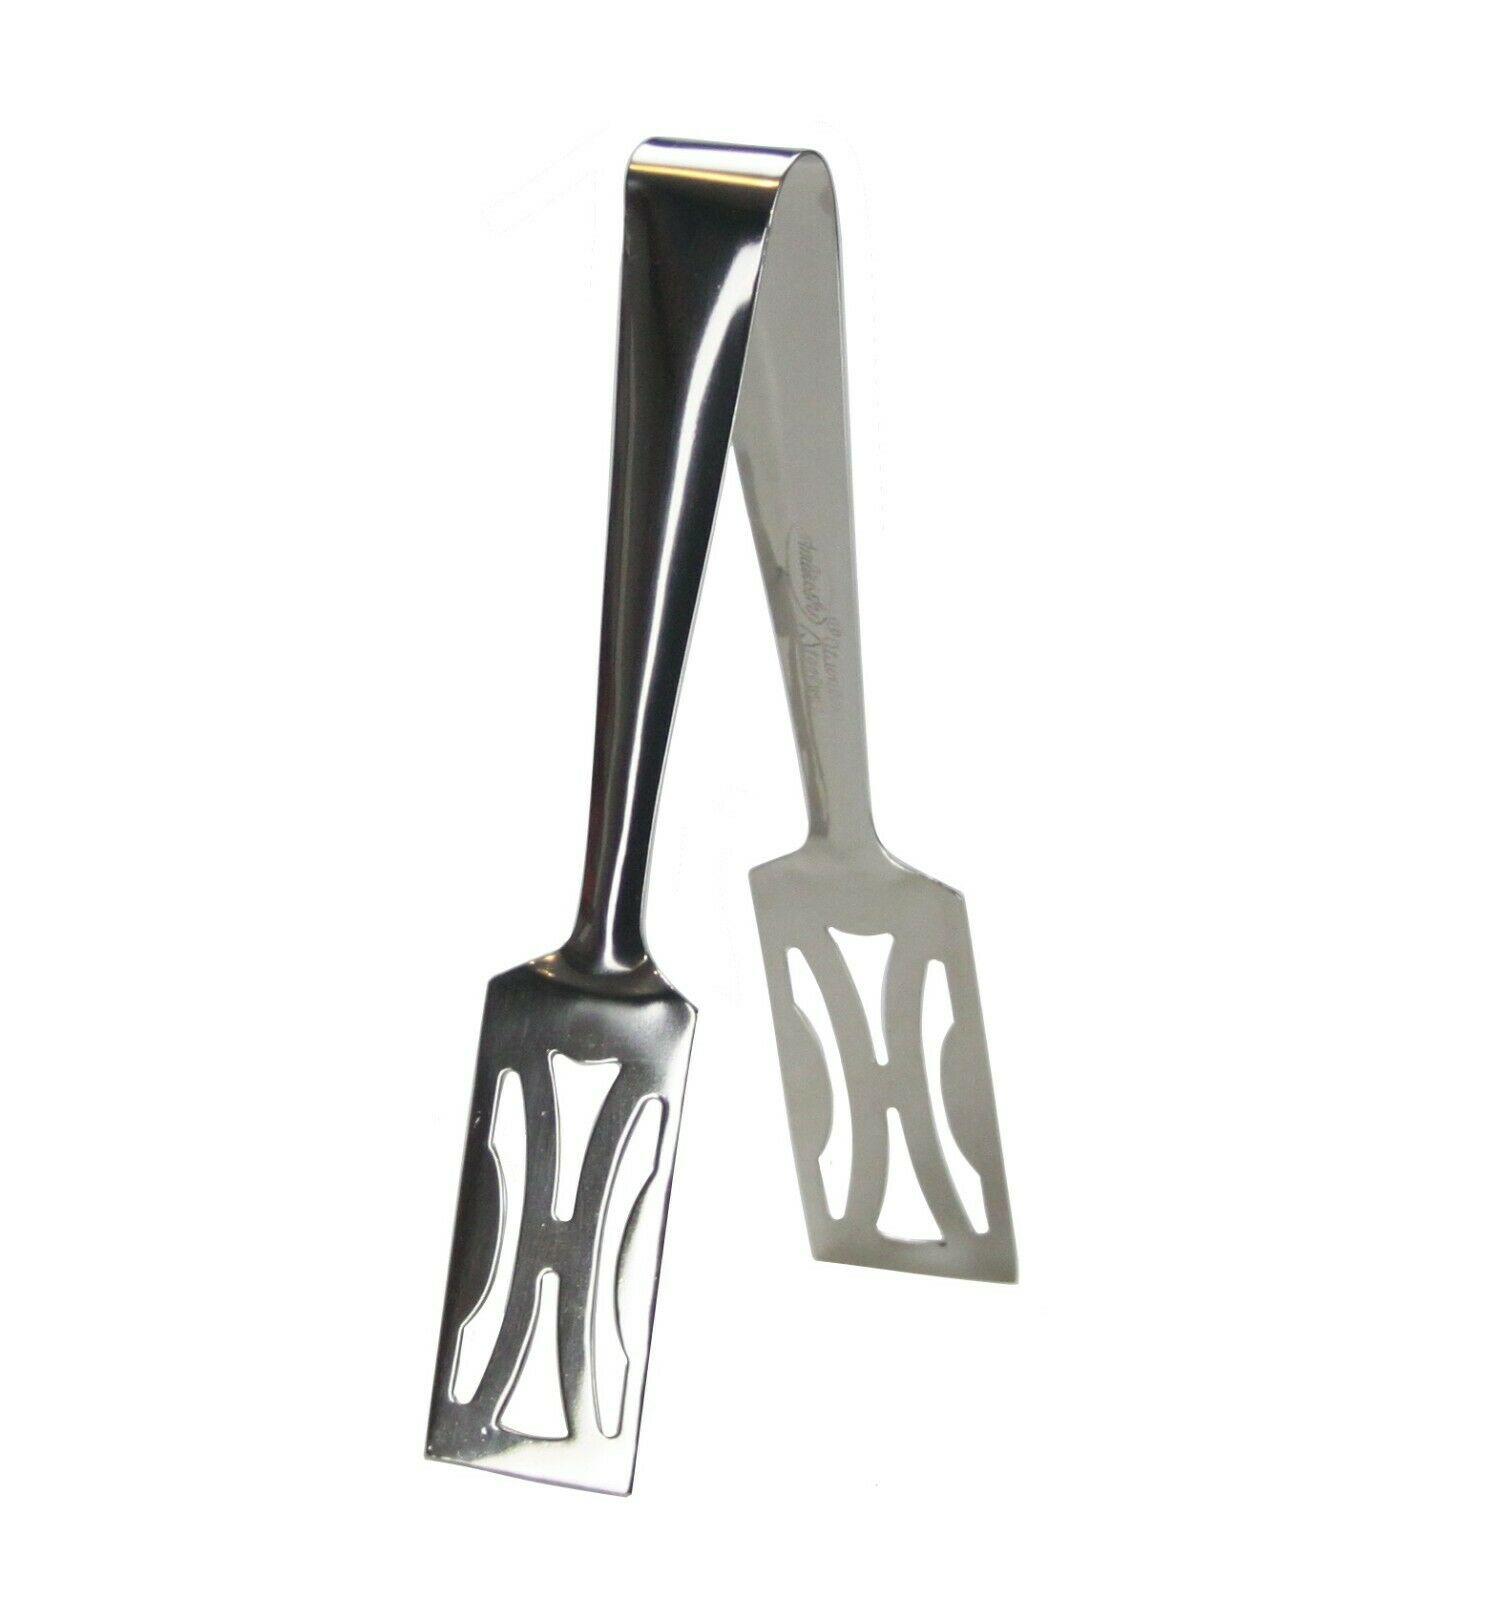 Salad Tongs Stainless Steel BBQ Paratha Cake Pastry Sandwich Serving ...